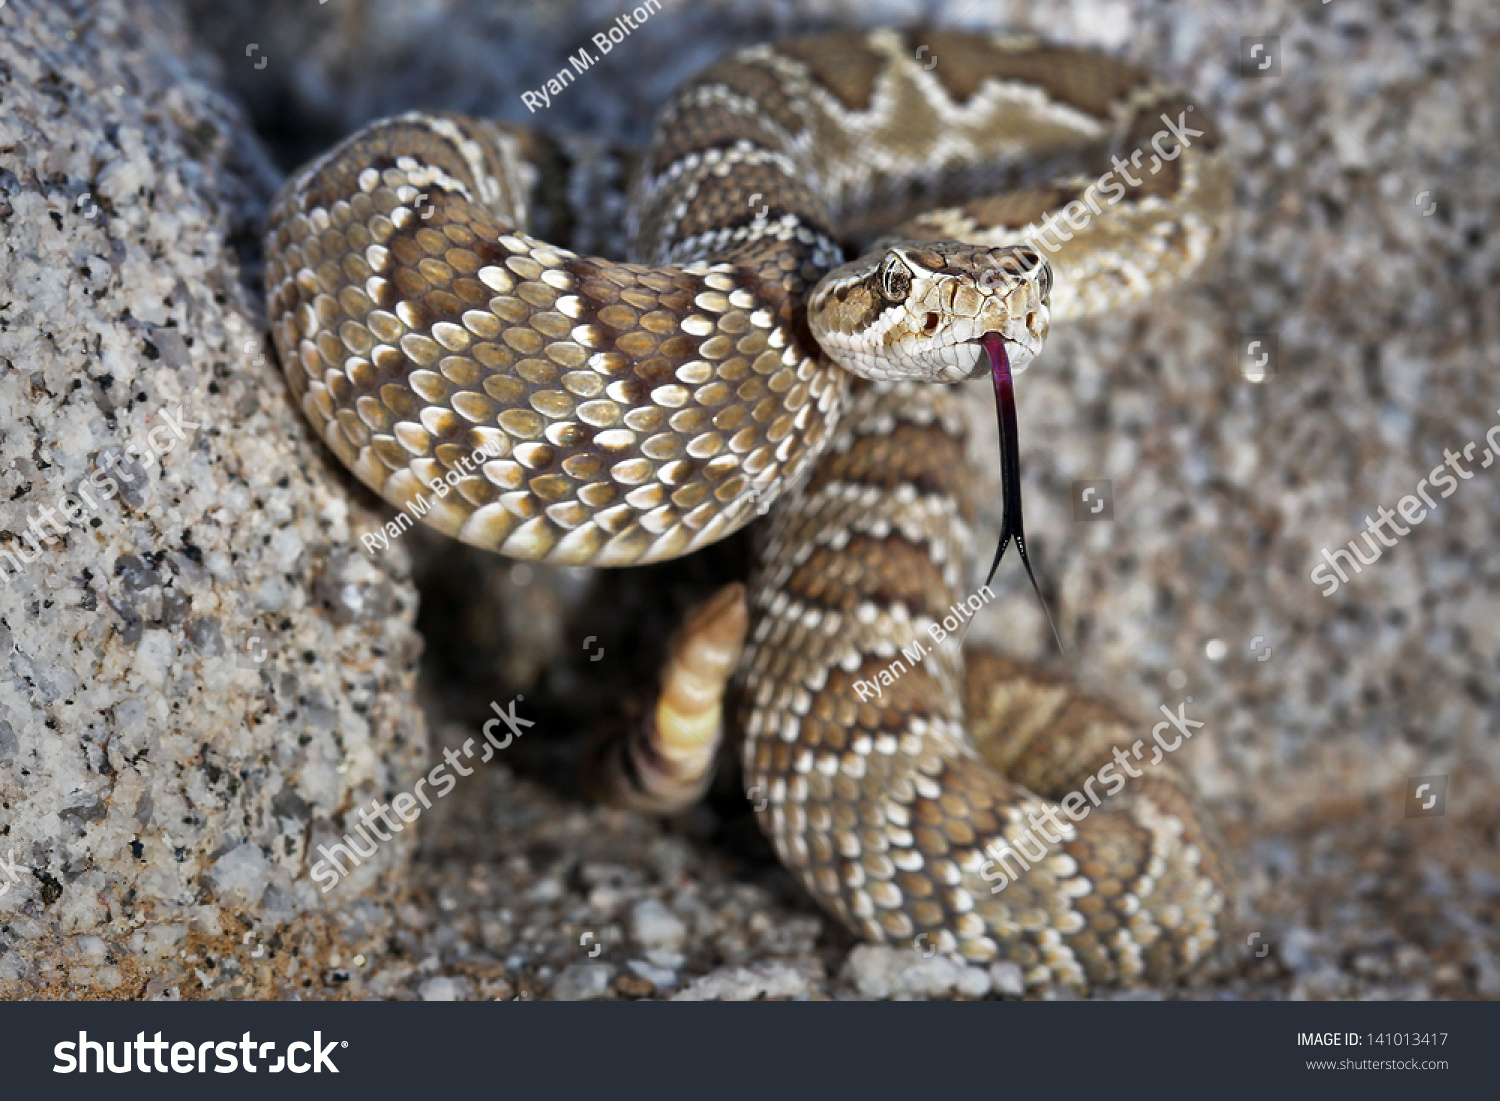 A Mojave or Mohave Rattlesnake (Crotalus scutulatus) rattles and flicks tongue in Arizona, USA.  This is the most dangerous snake in the USA. It is perhaps best known for its potent neurotoxic venom. #141013417